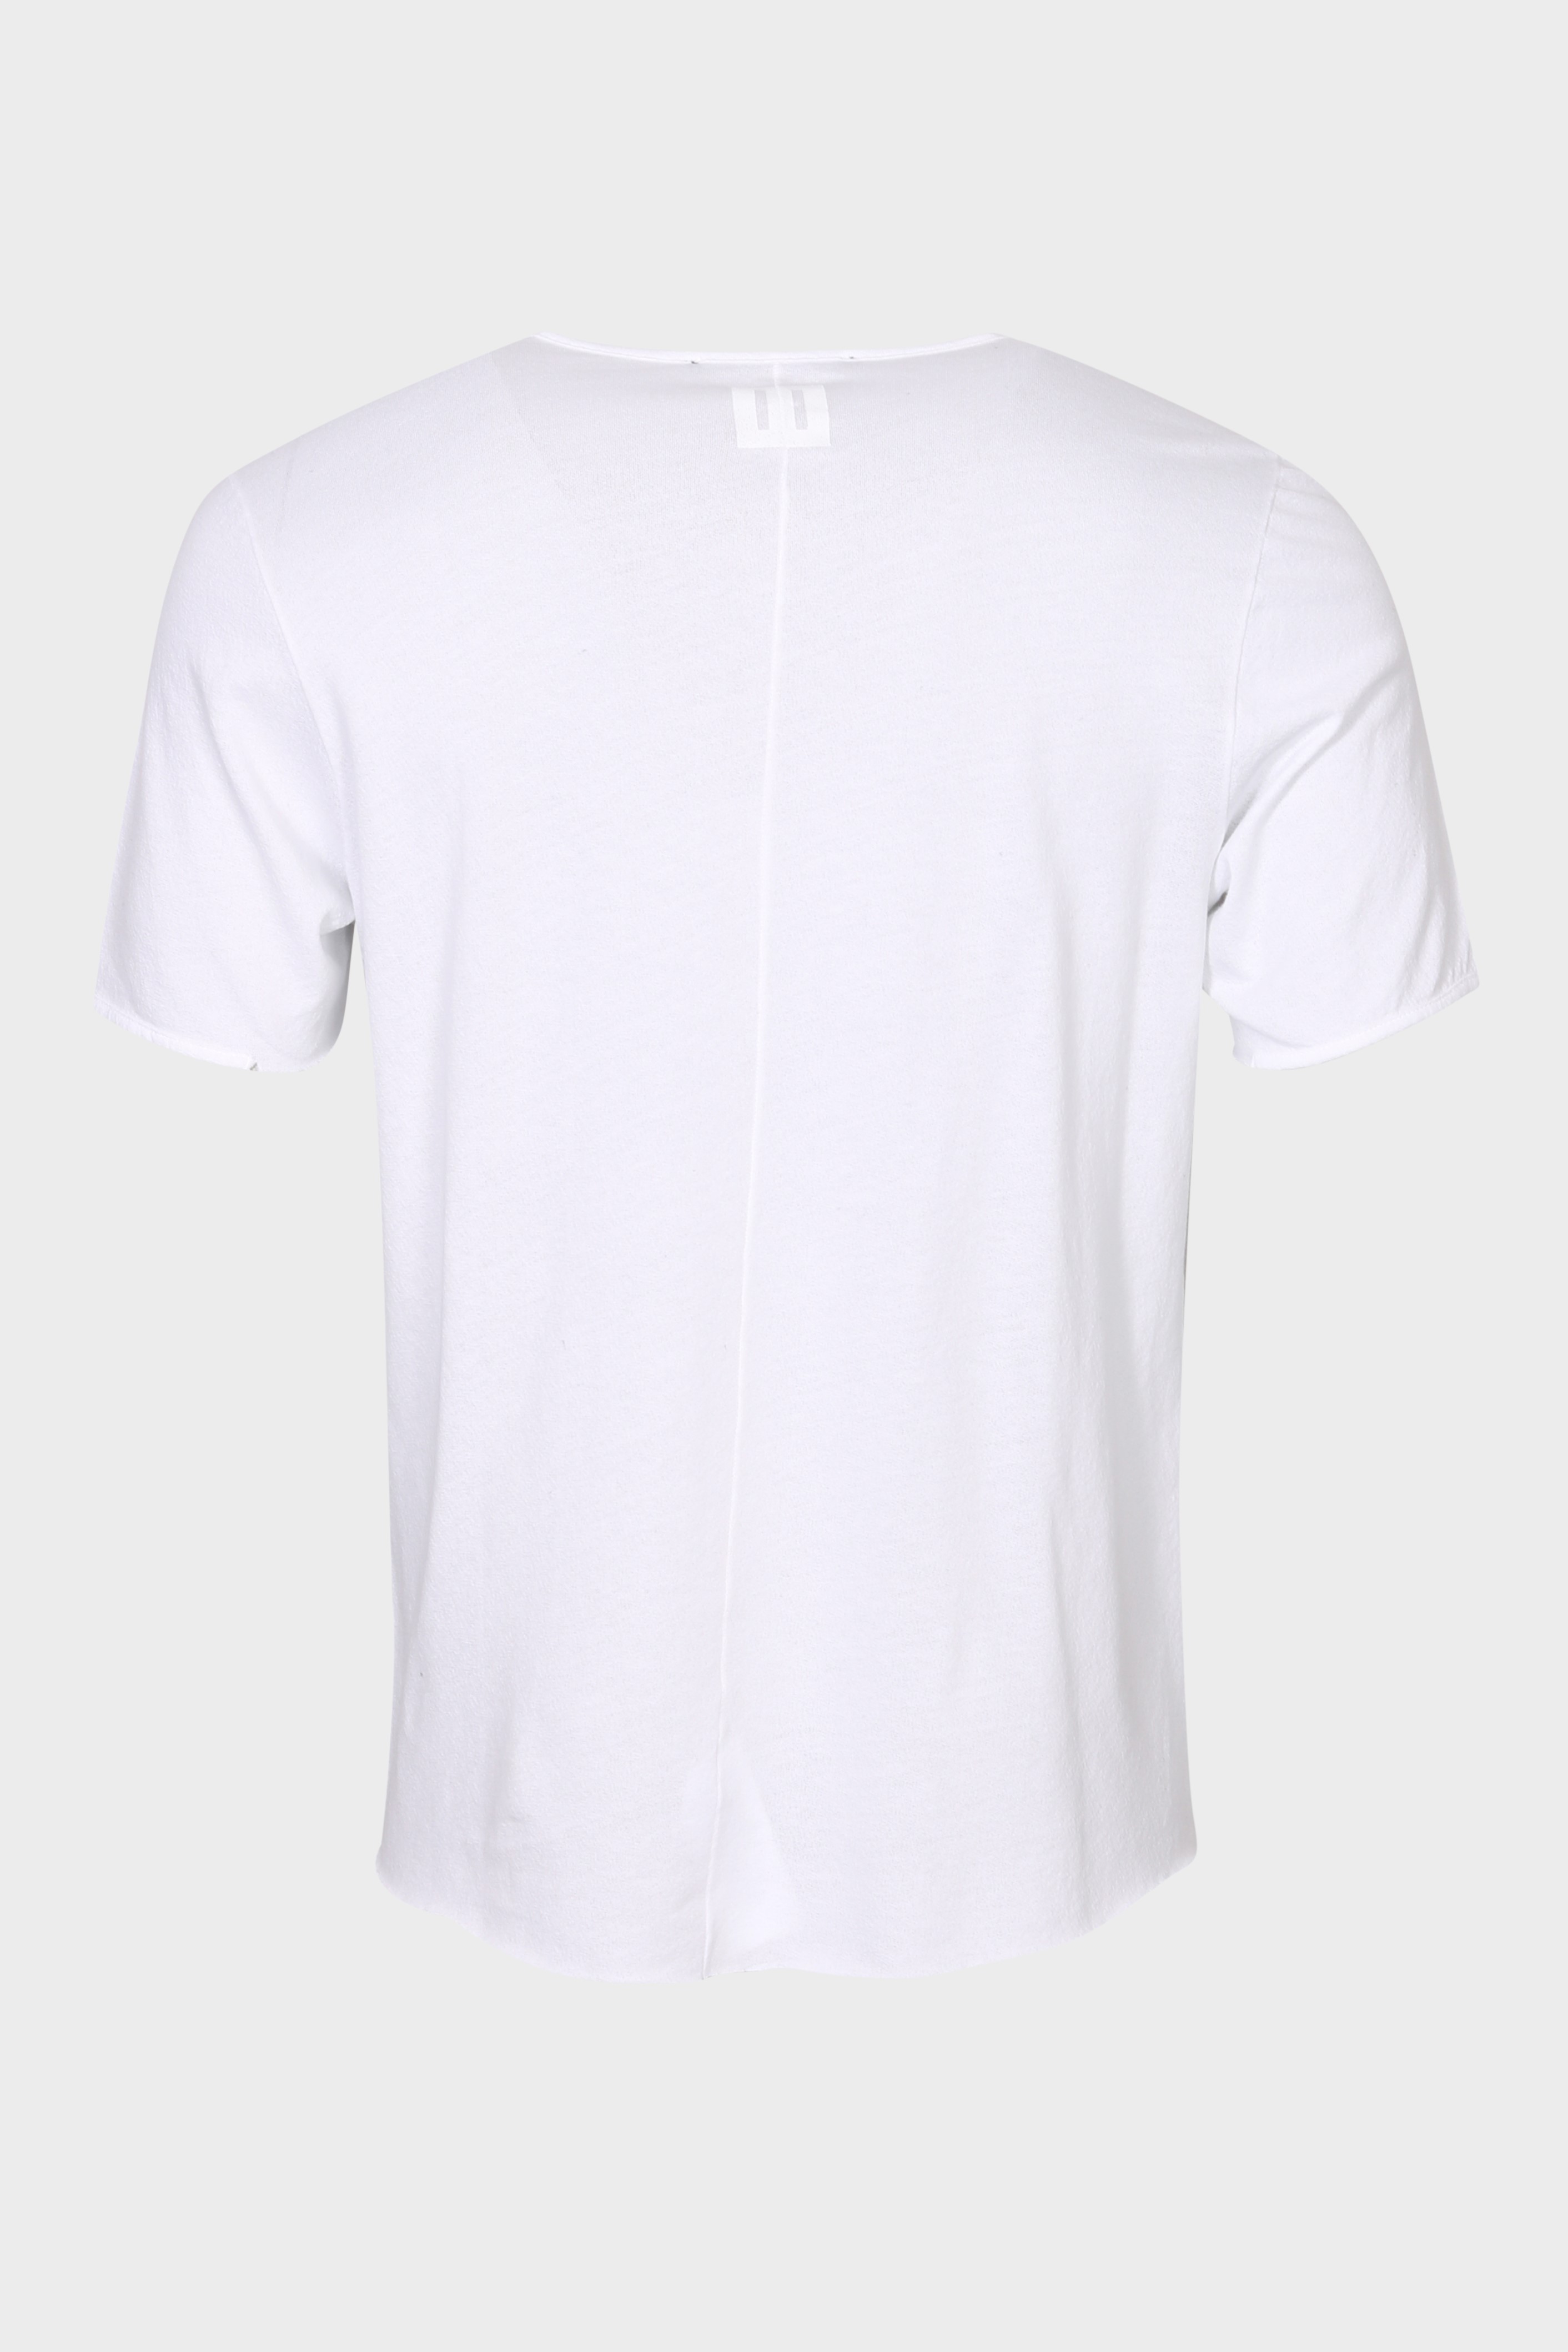 HANNES ROETHER T-Shirt in White 2XL